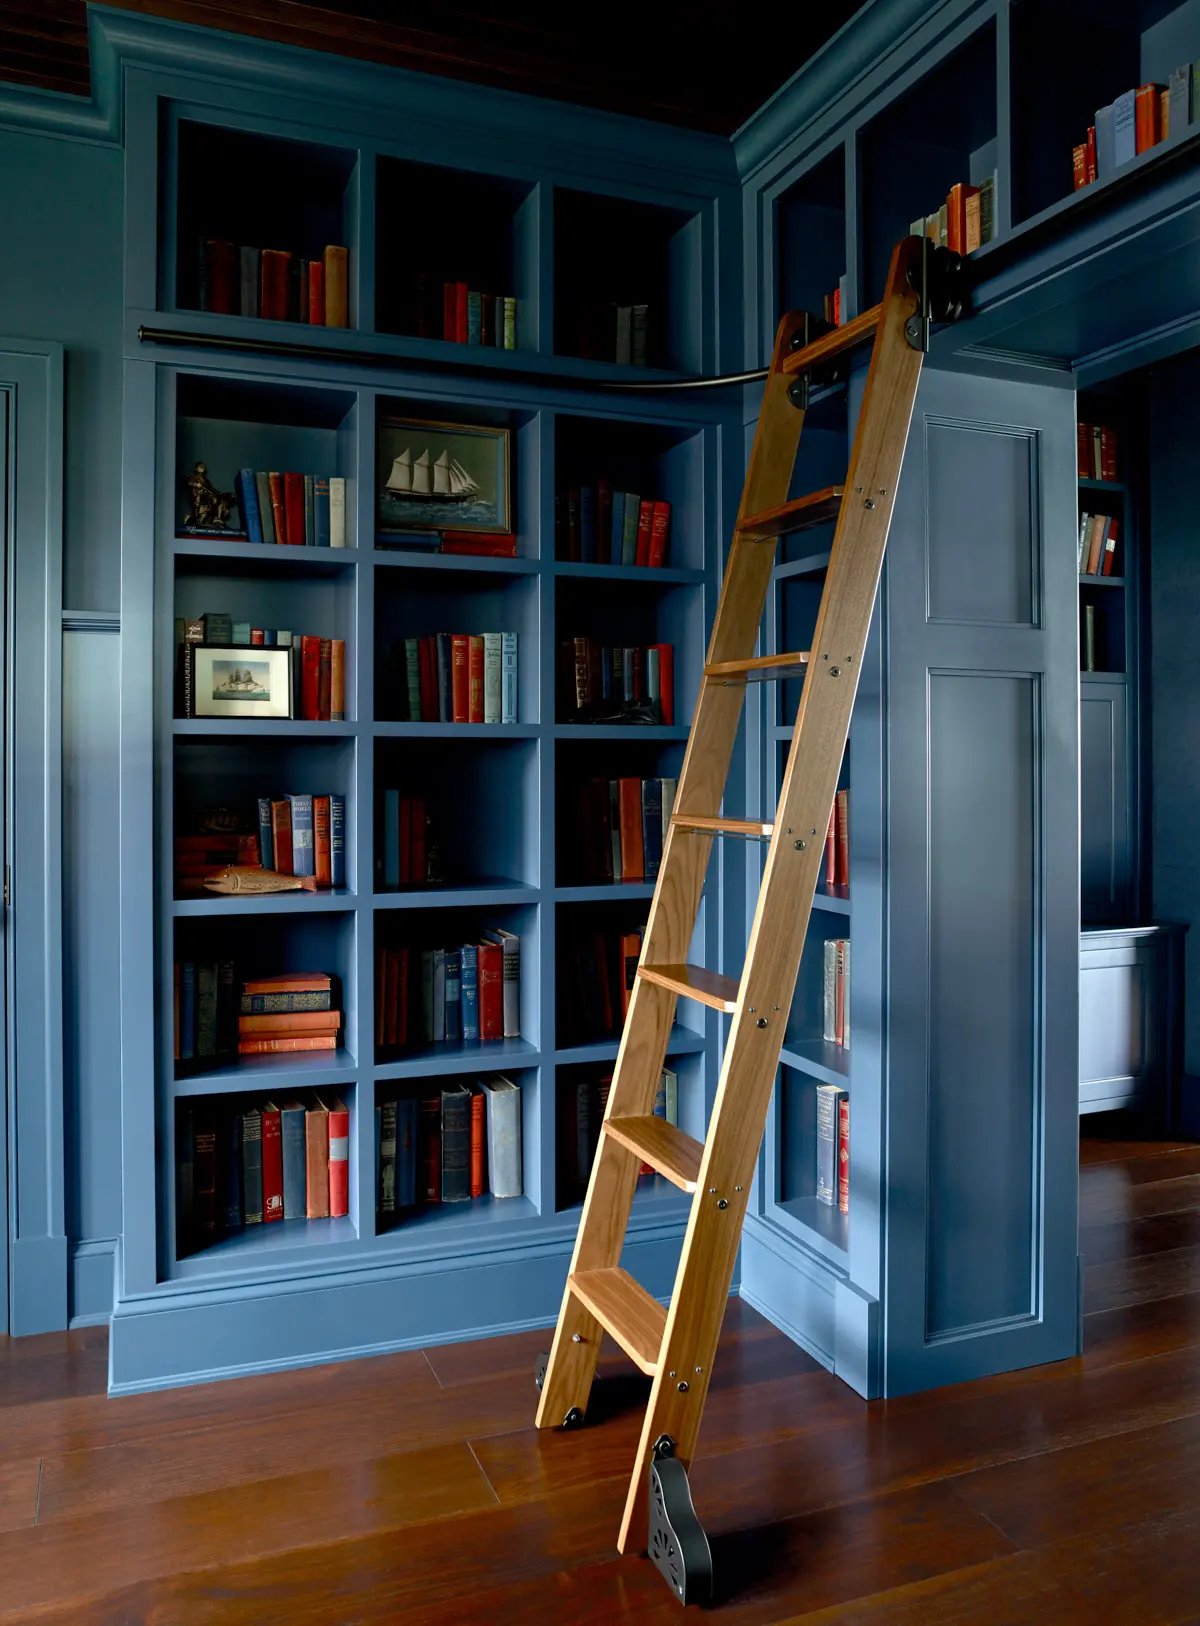 A view of the library at Pulpit Rock, complete with a ladder to reach the top shelf.